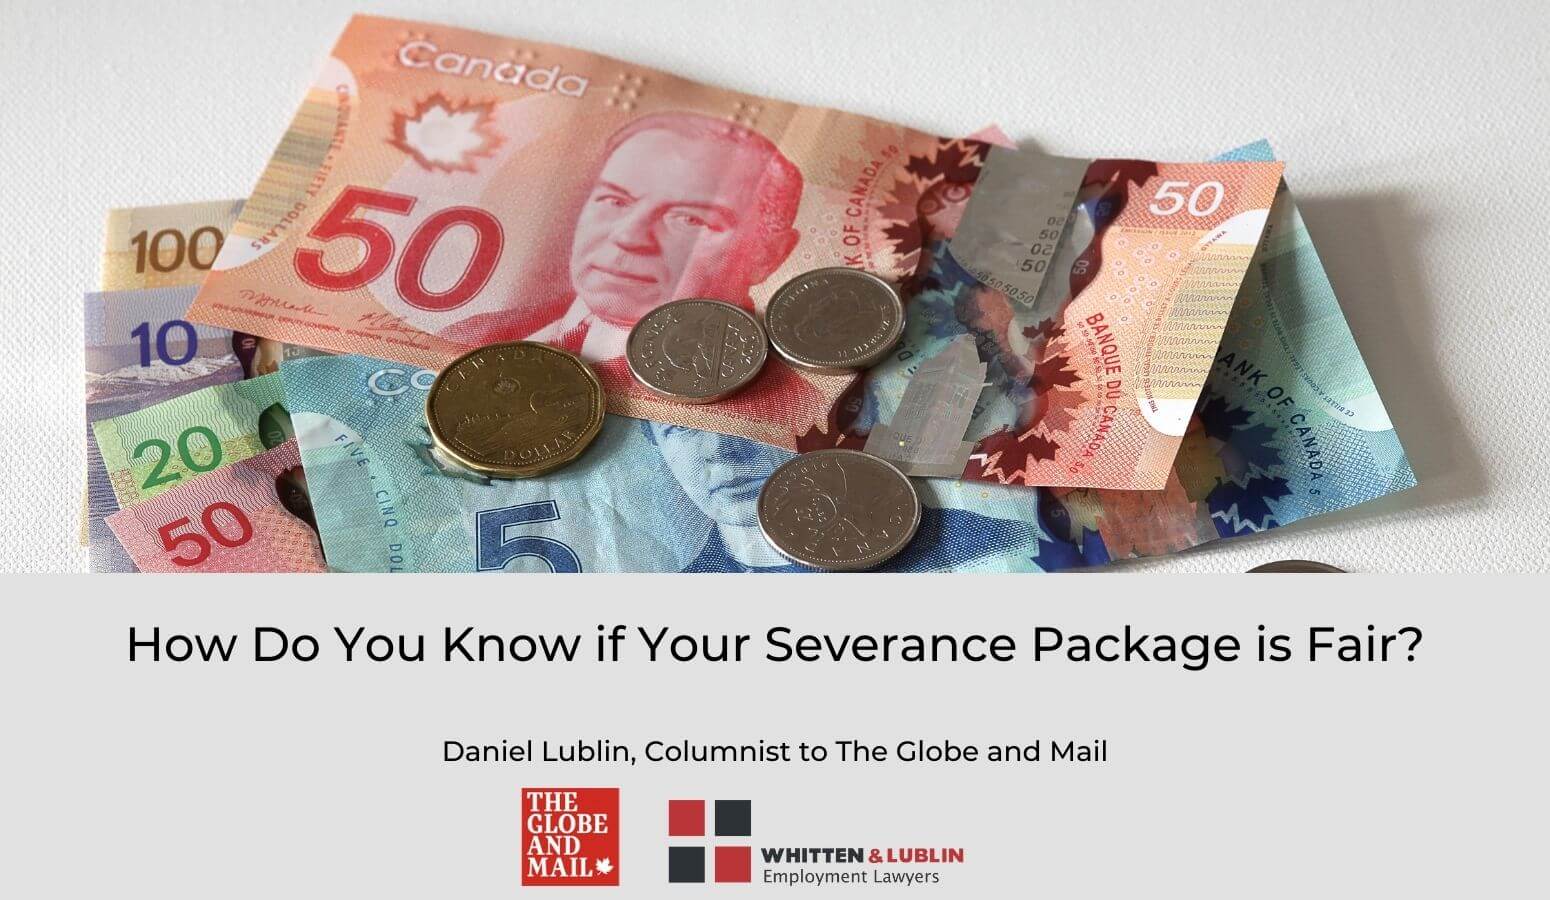 Featured image for “How Do You Know if Your Severance Package is Fair?”